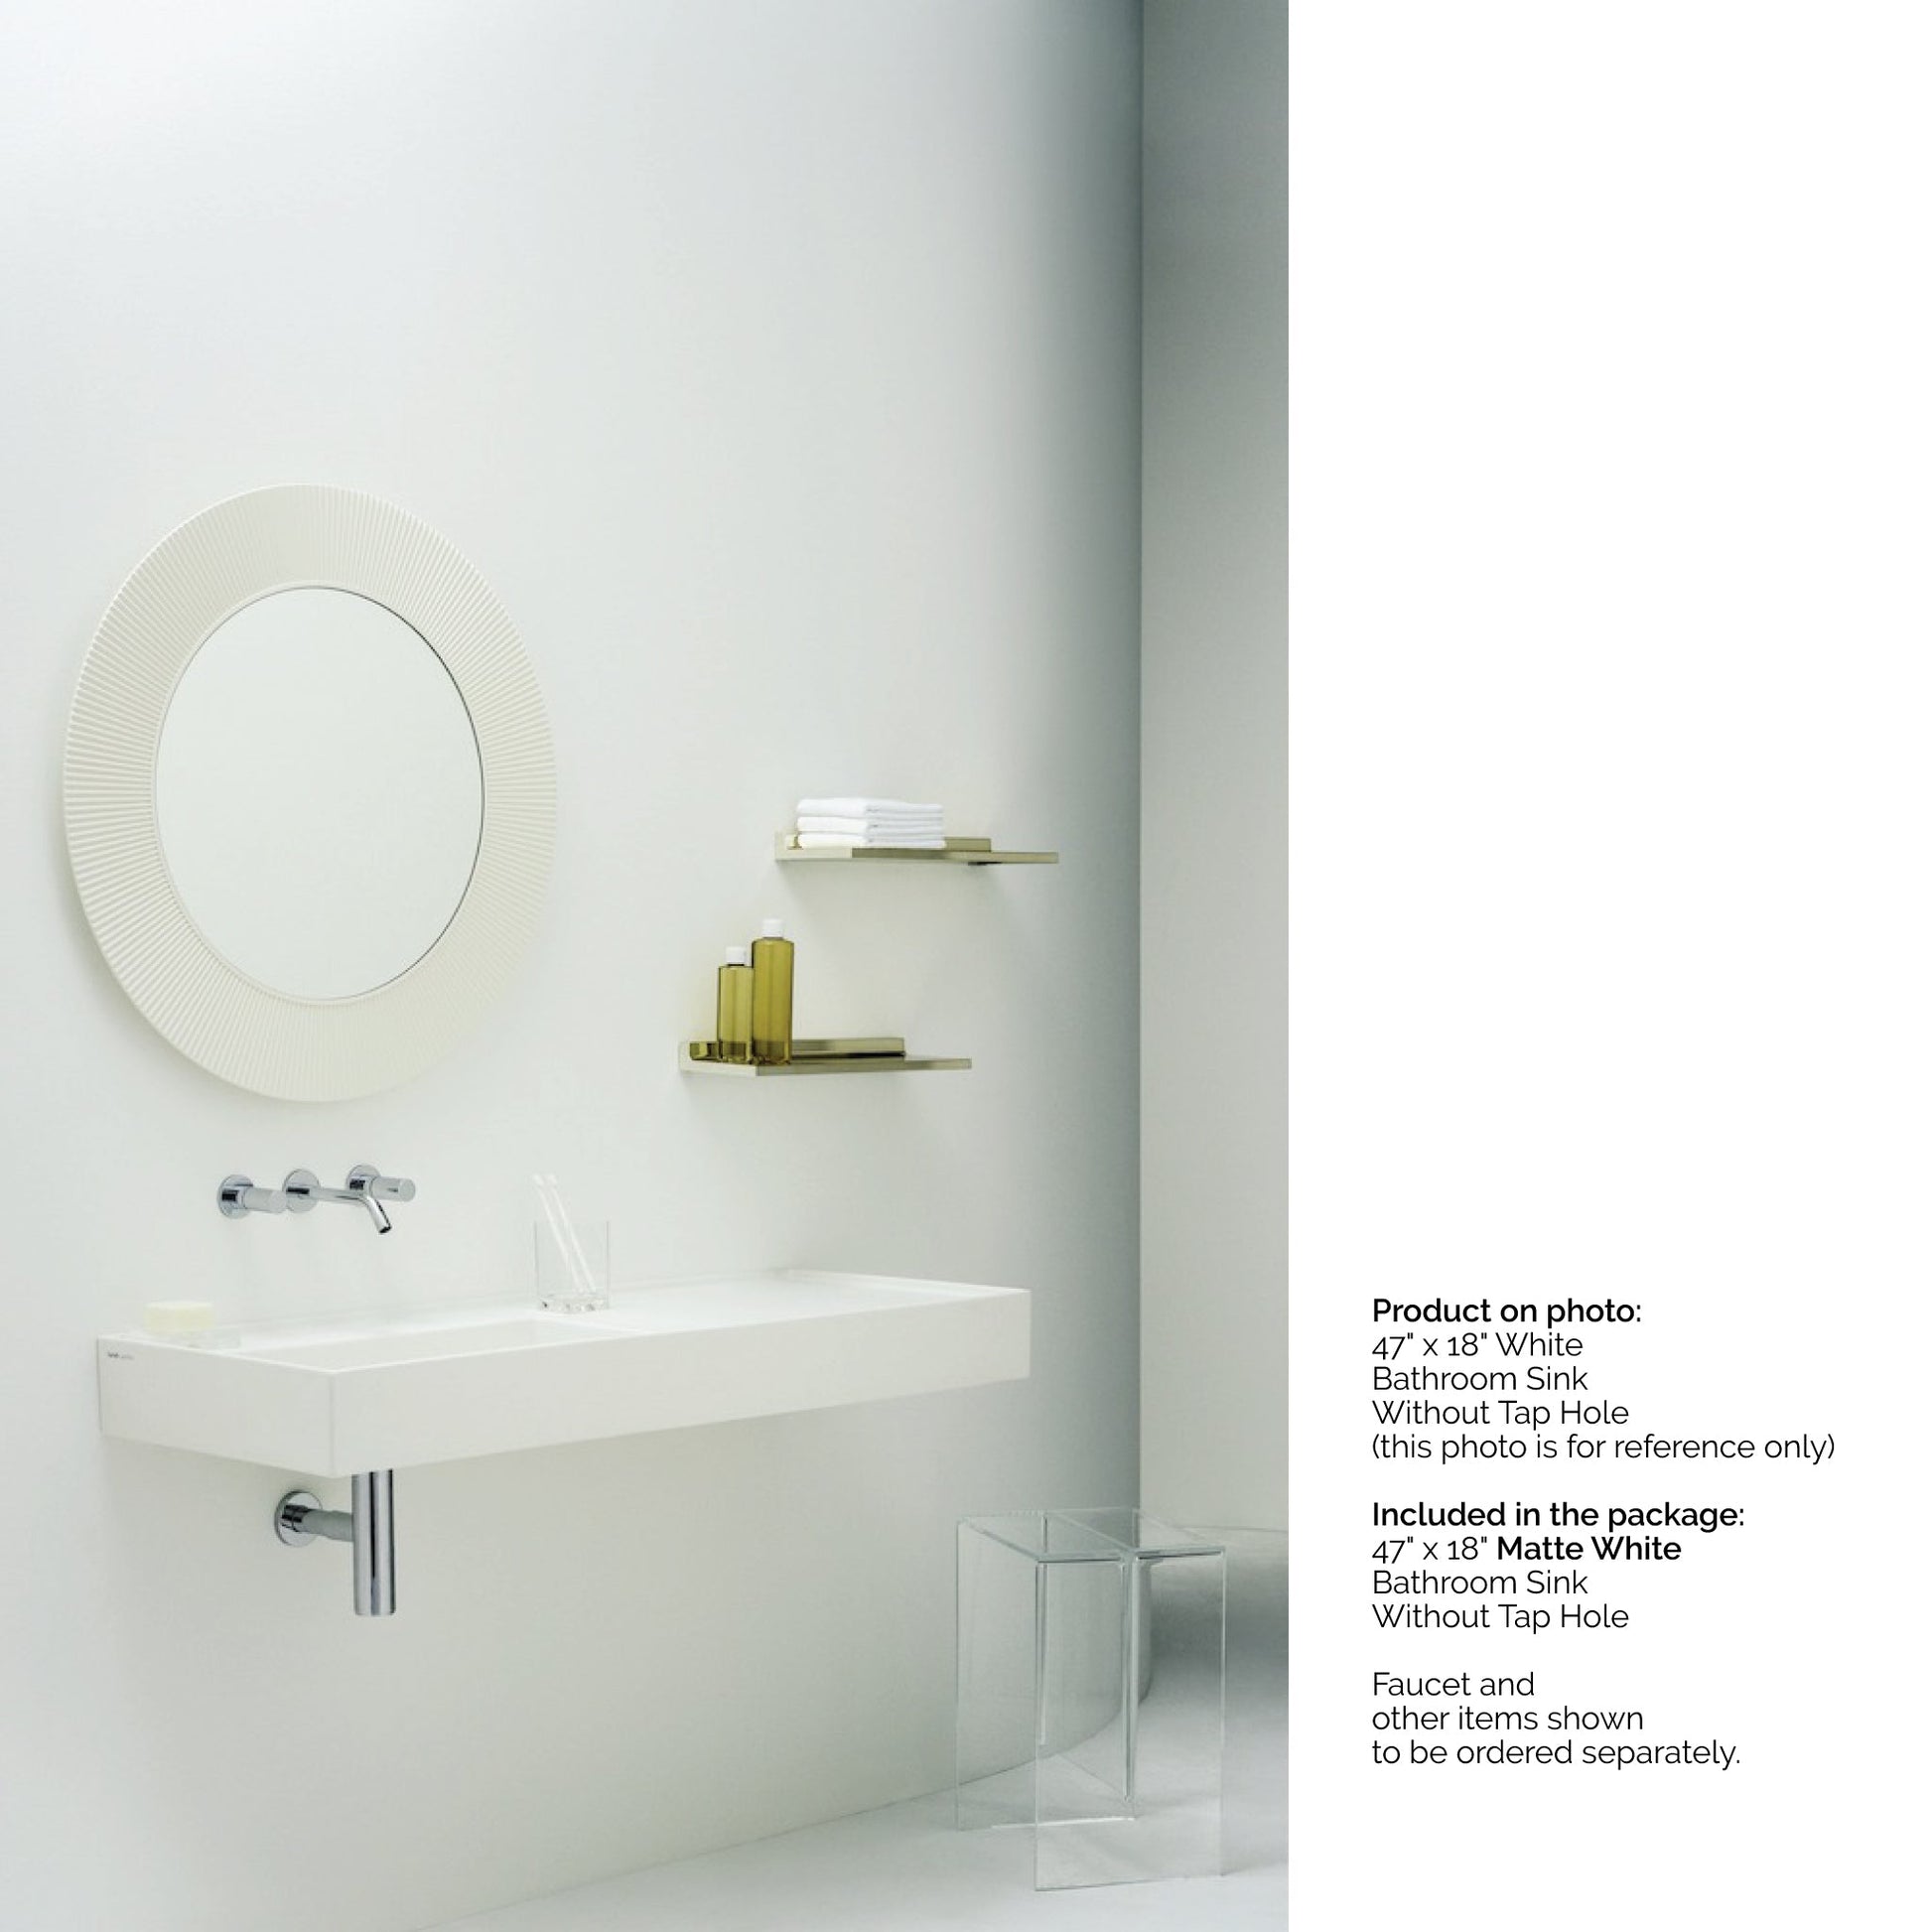 Laufen Kartell 47" x 18" Matte White Wall-Mounted Shelf-Right Bathroom Sink Without Faucet Hole